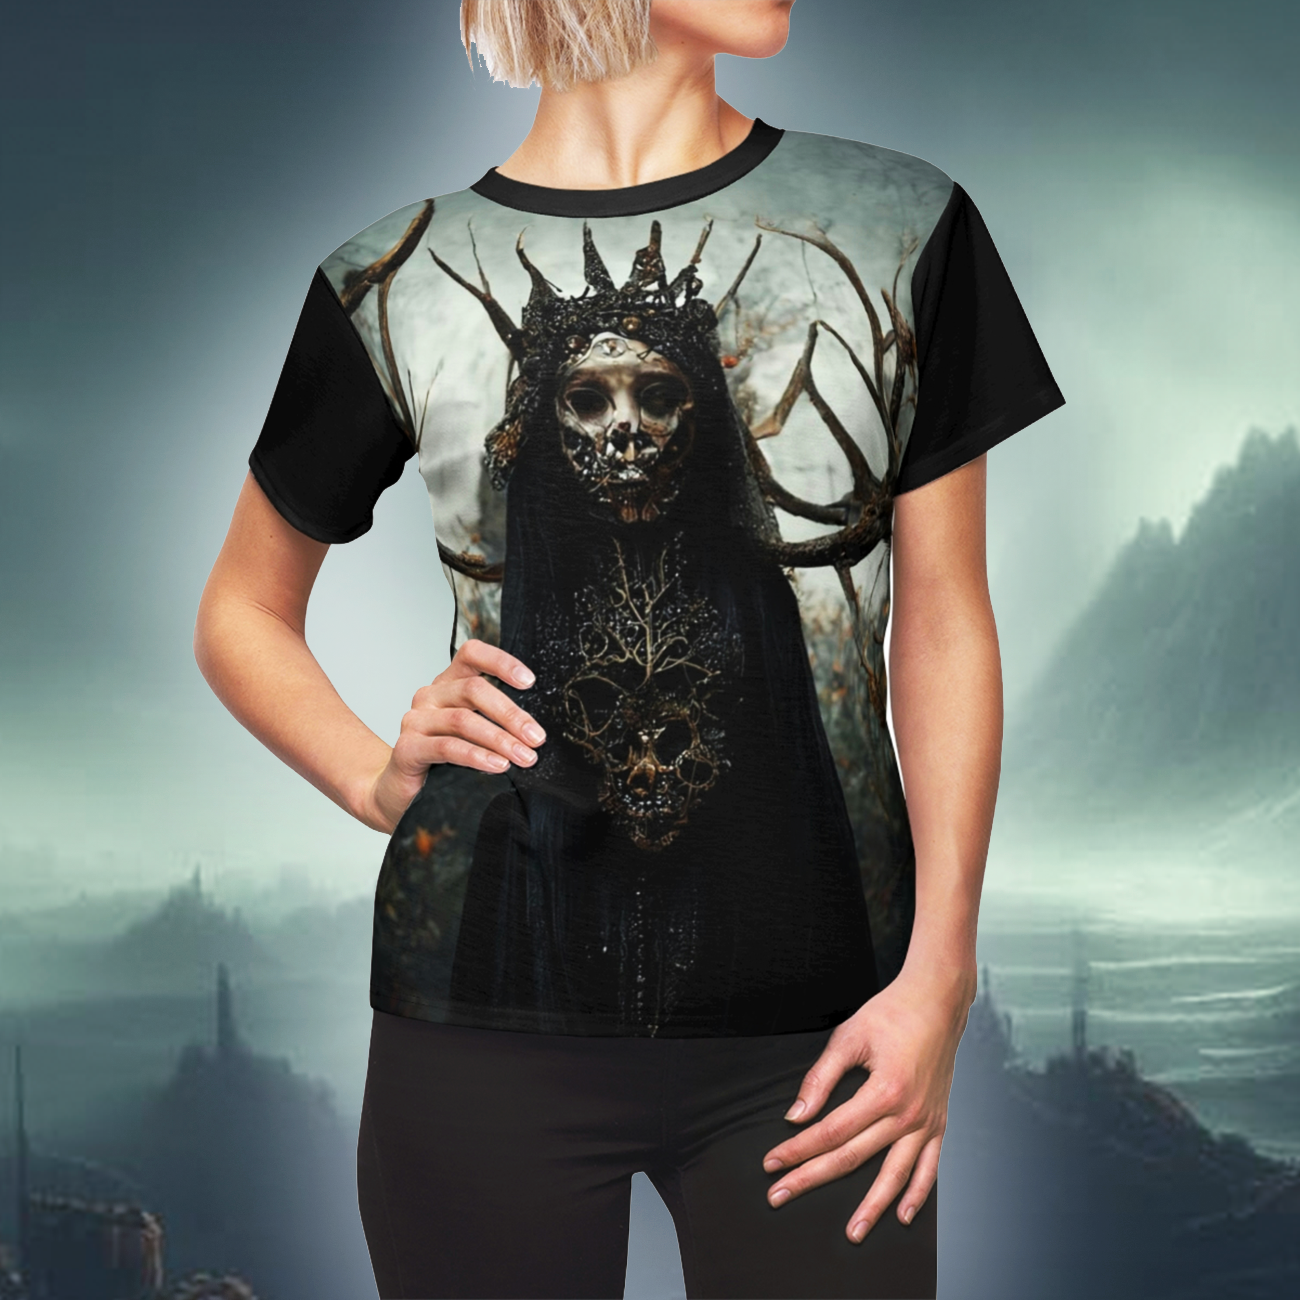 Gothic horror art t-shirt of a terrifying evil witch,